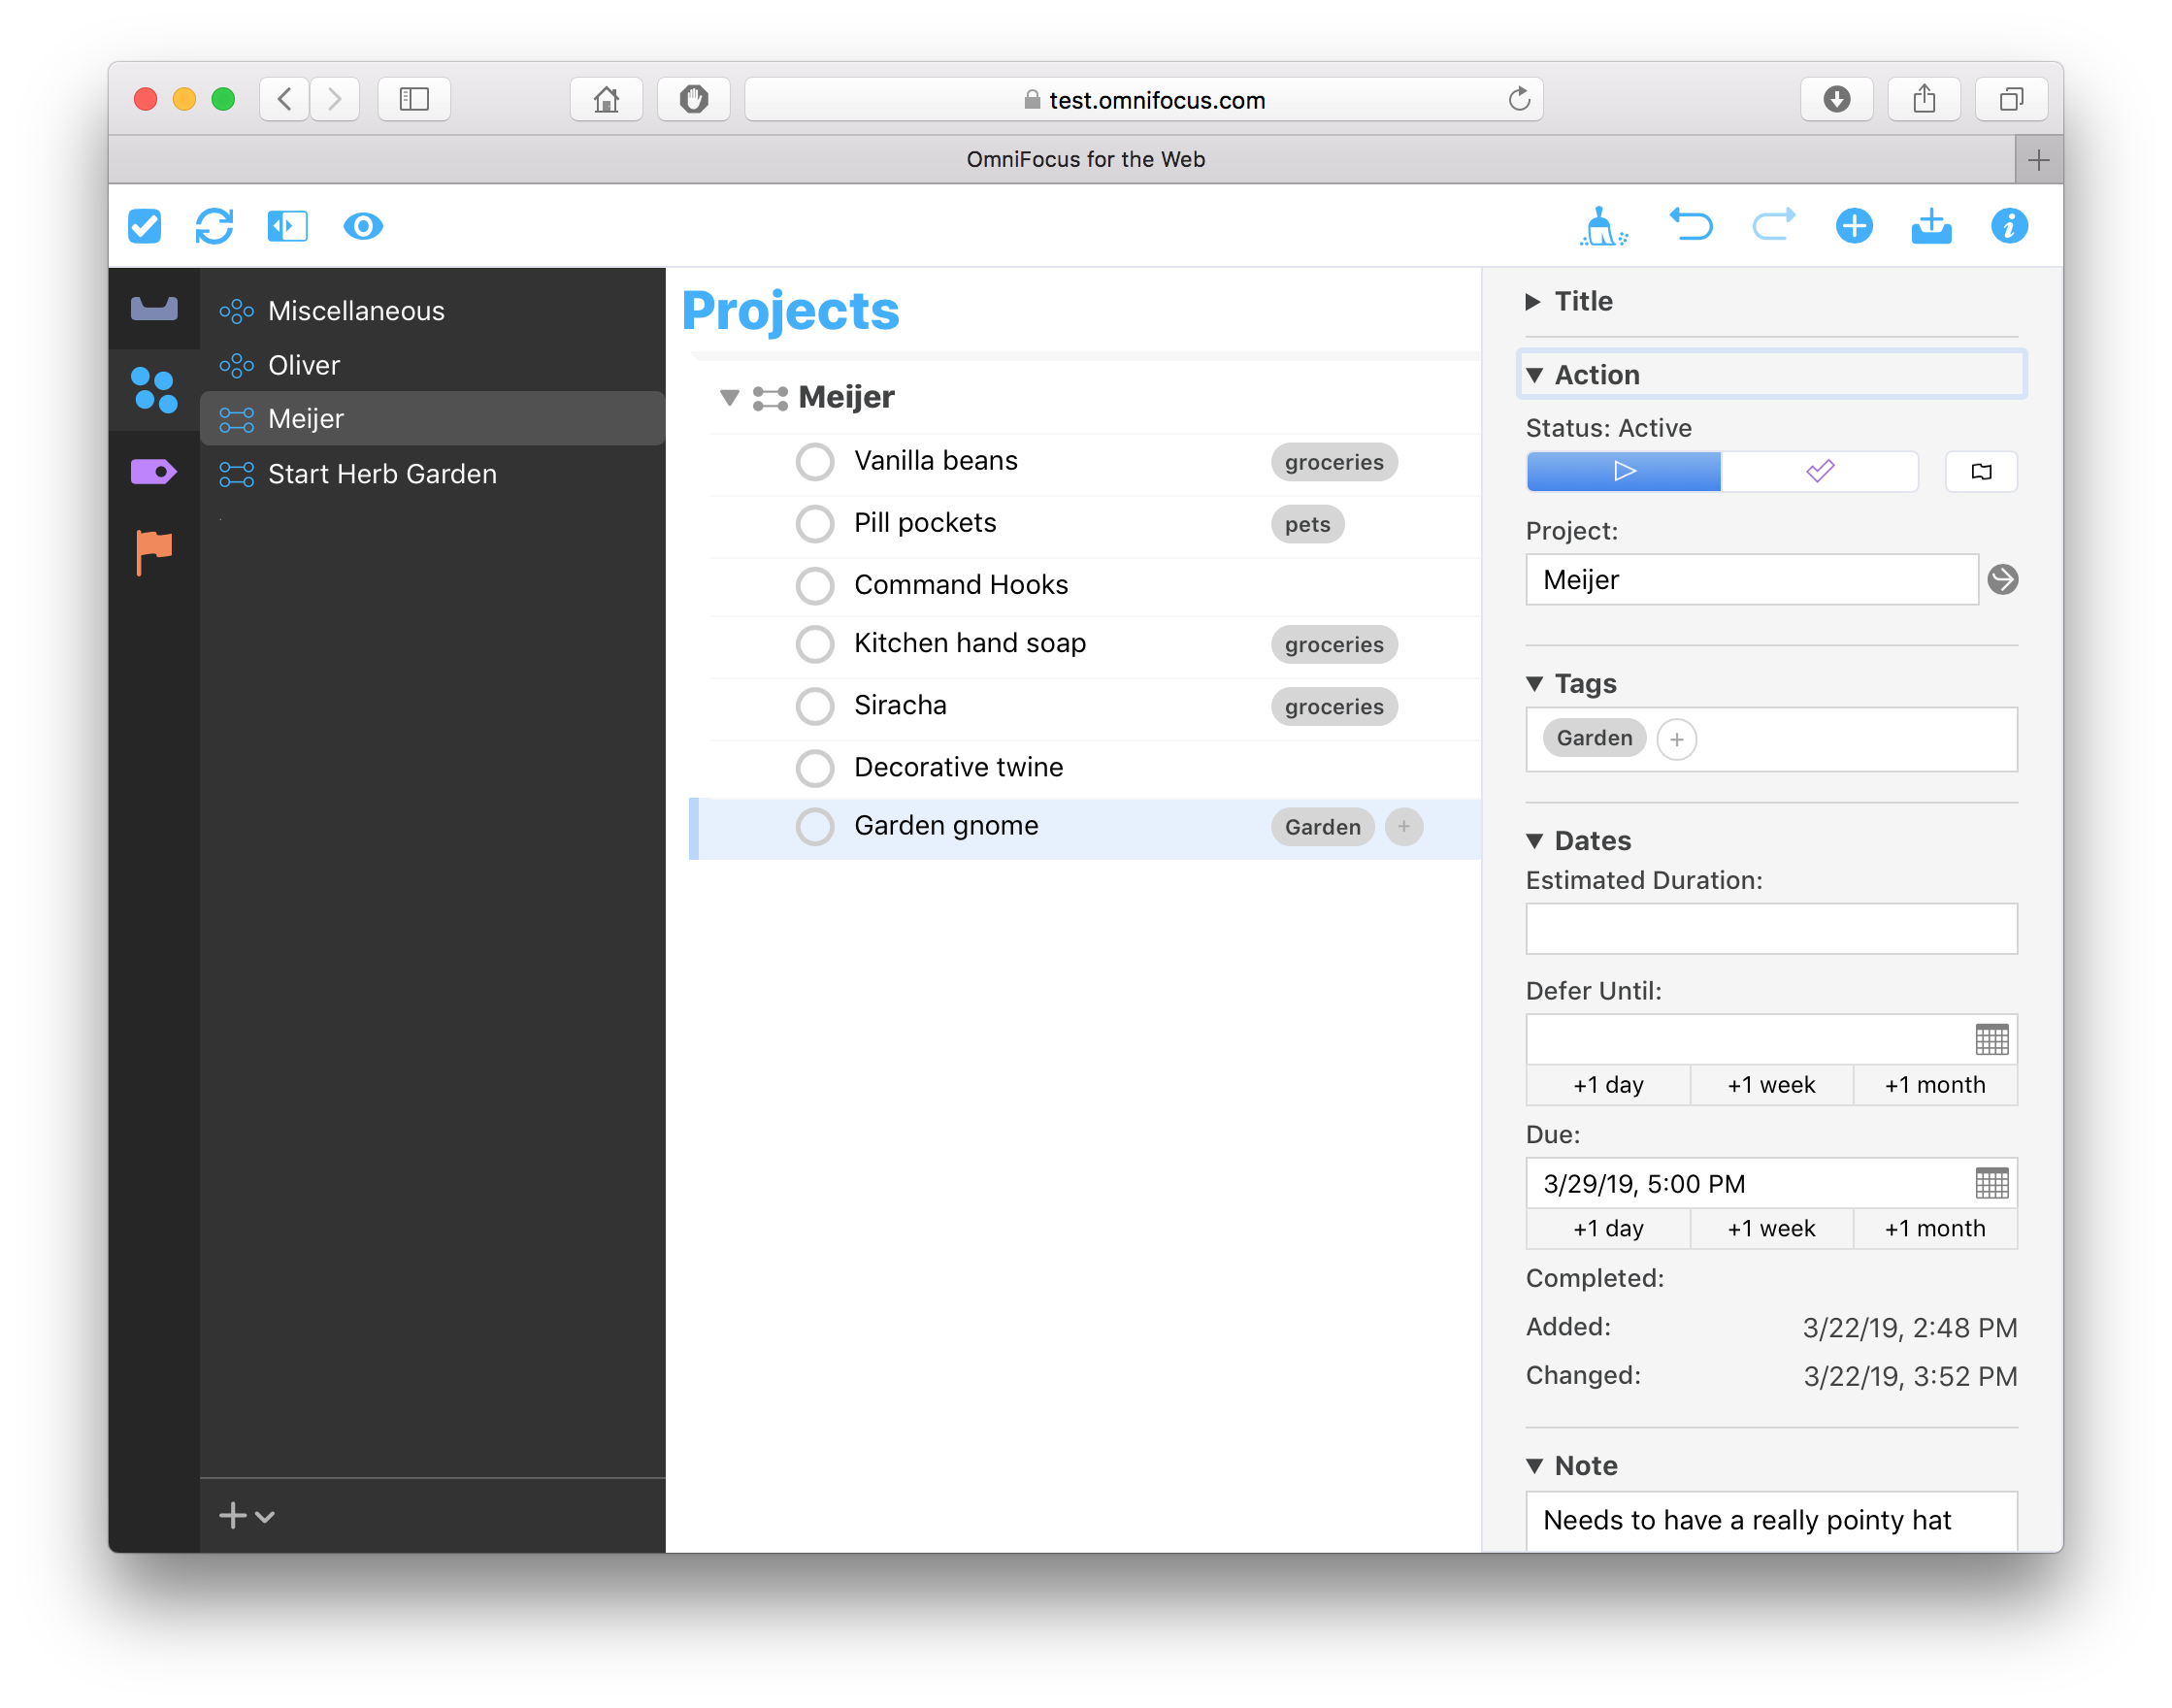 Screen shot of the public test of OmniFocus for the Web, looking at the details of a Project